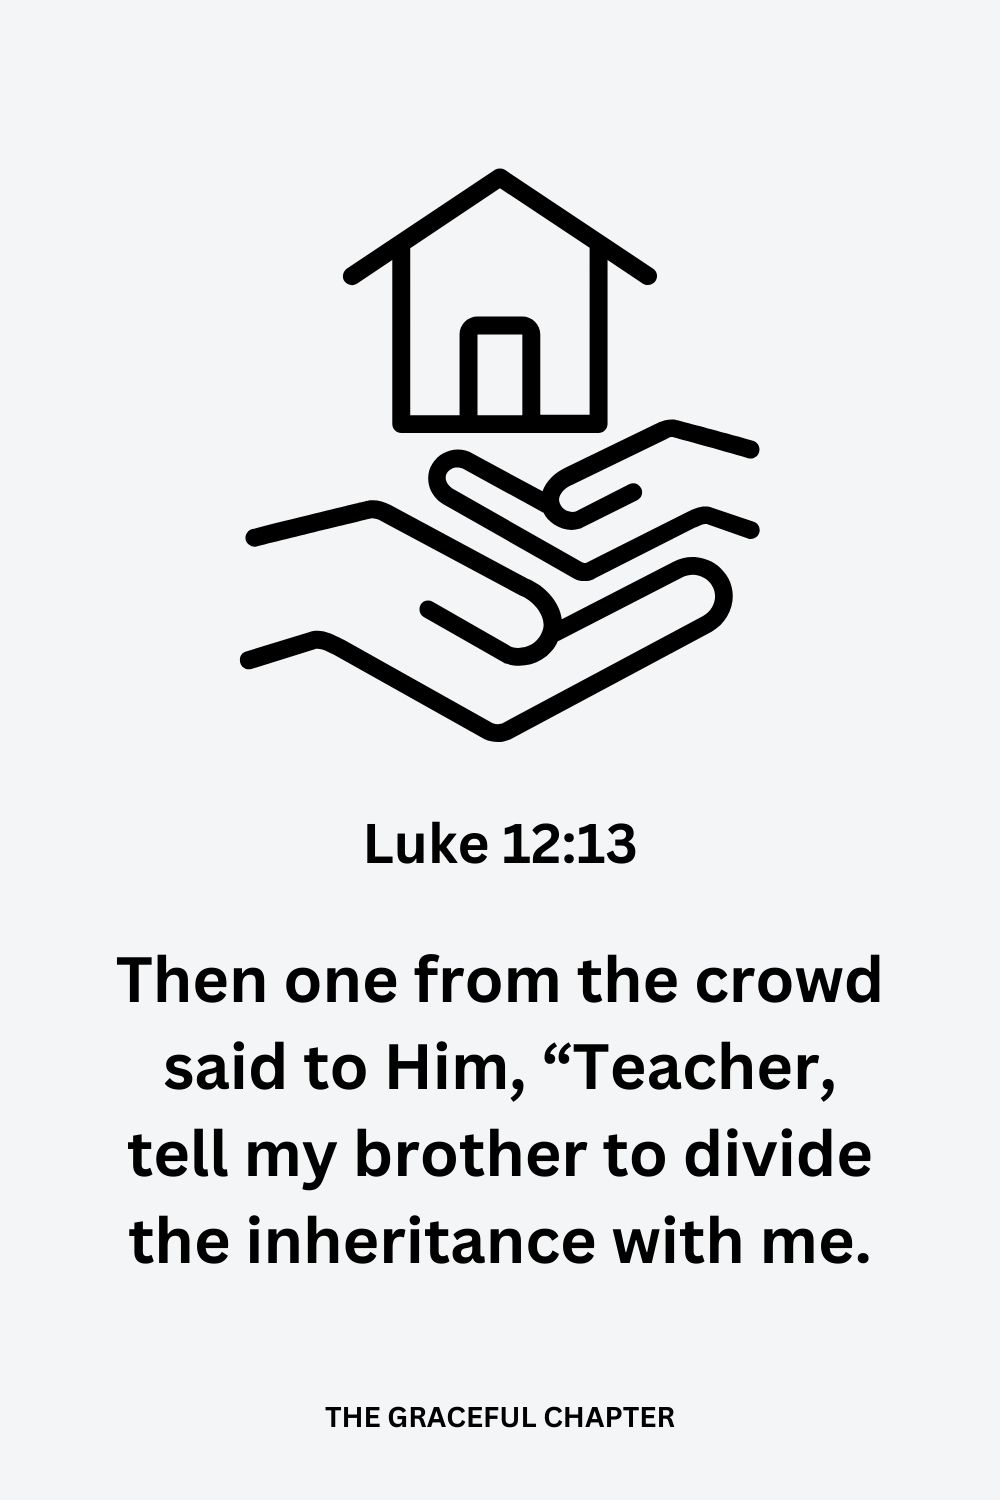 Then one from the crowd said to Him, “Teacher, tell my brother to divide the inheritance with me. Luke 12:13